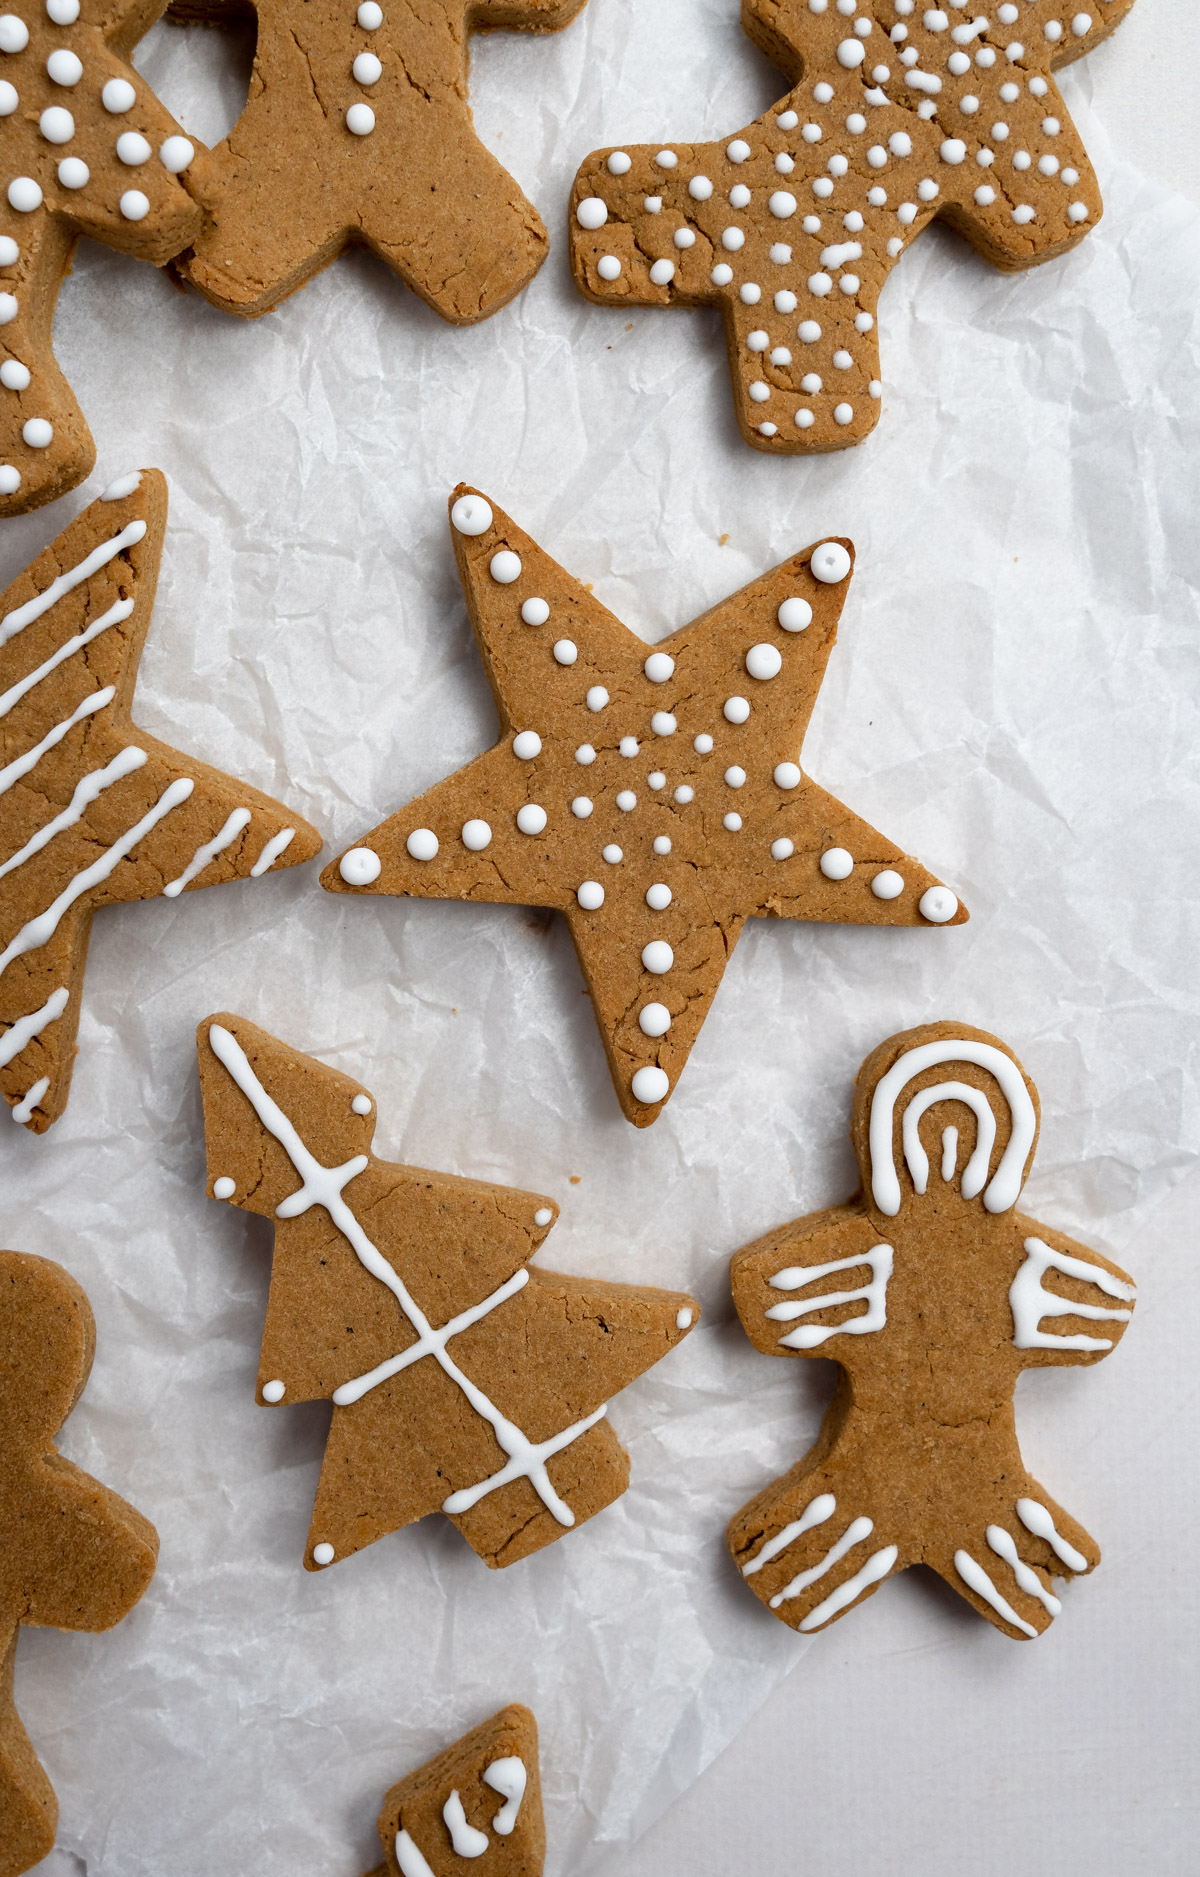 gluten-free gingerbread cookies with white vegan royal icing on them